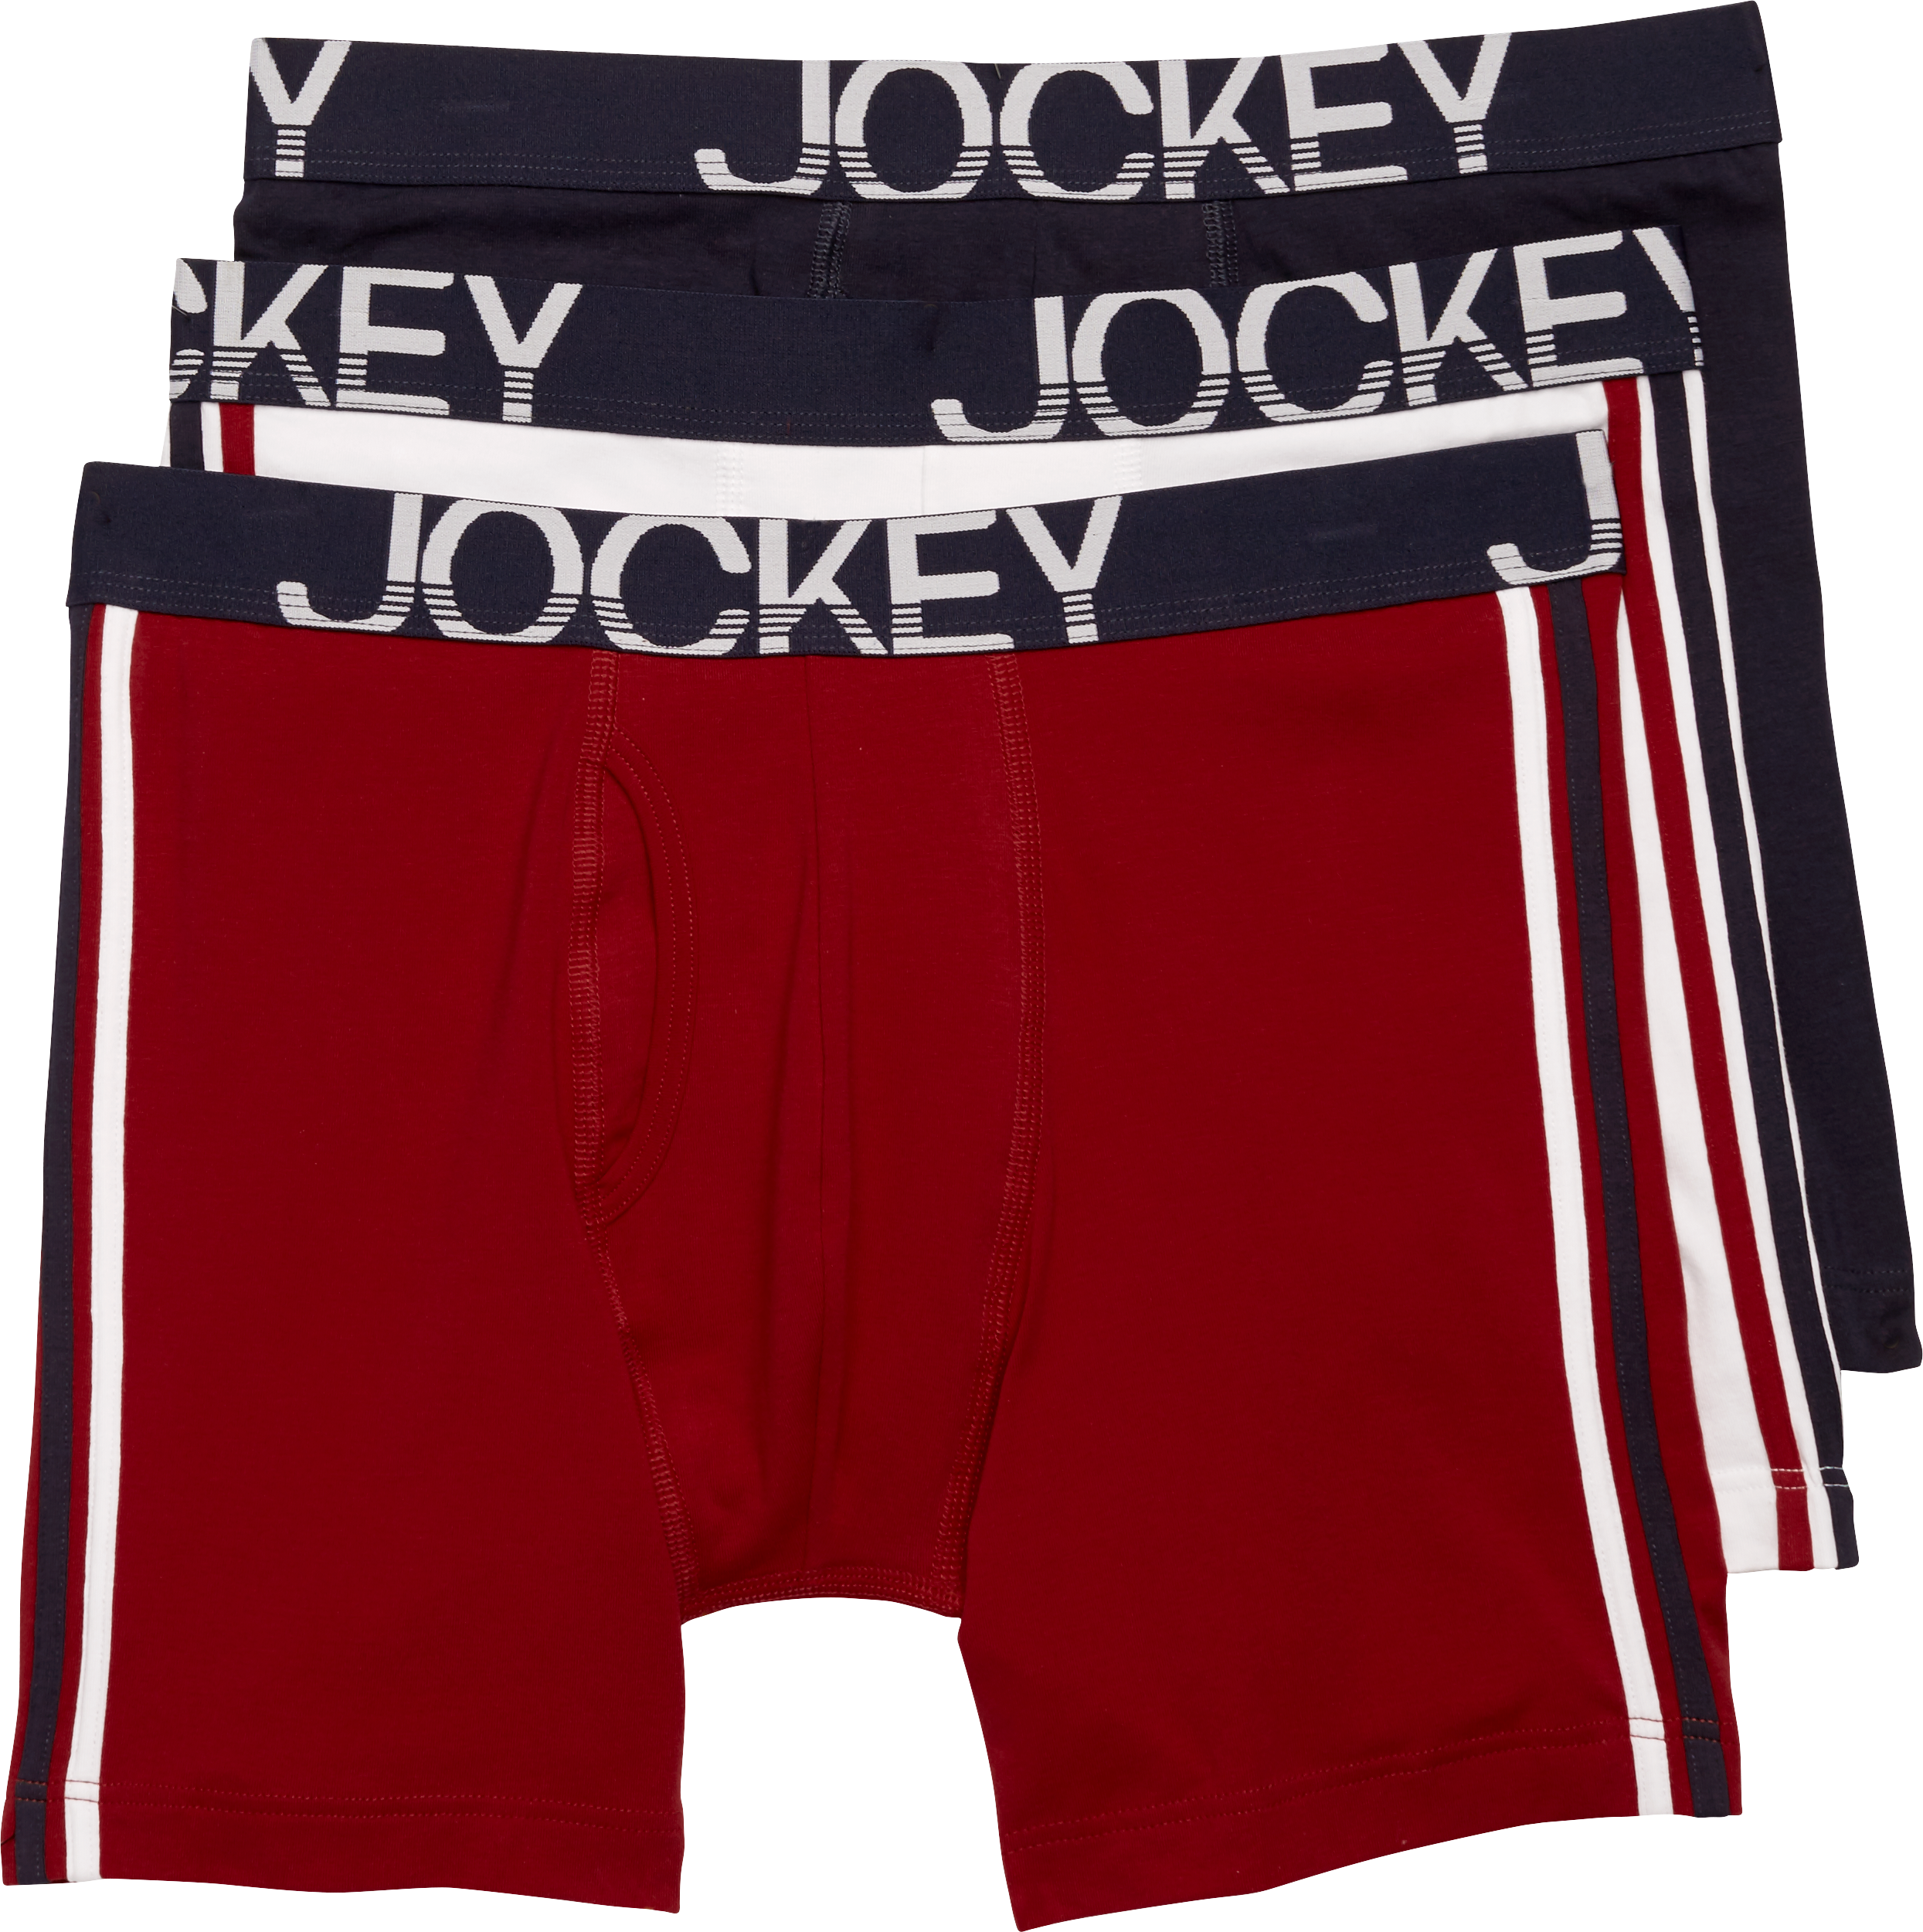 Jockey Red & Navy Low-Rise Boxer Briefs, 3-Pack - Men's Accessories ...